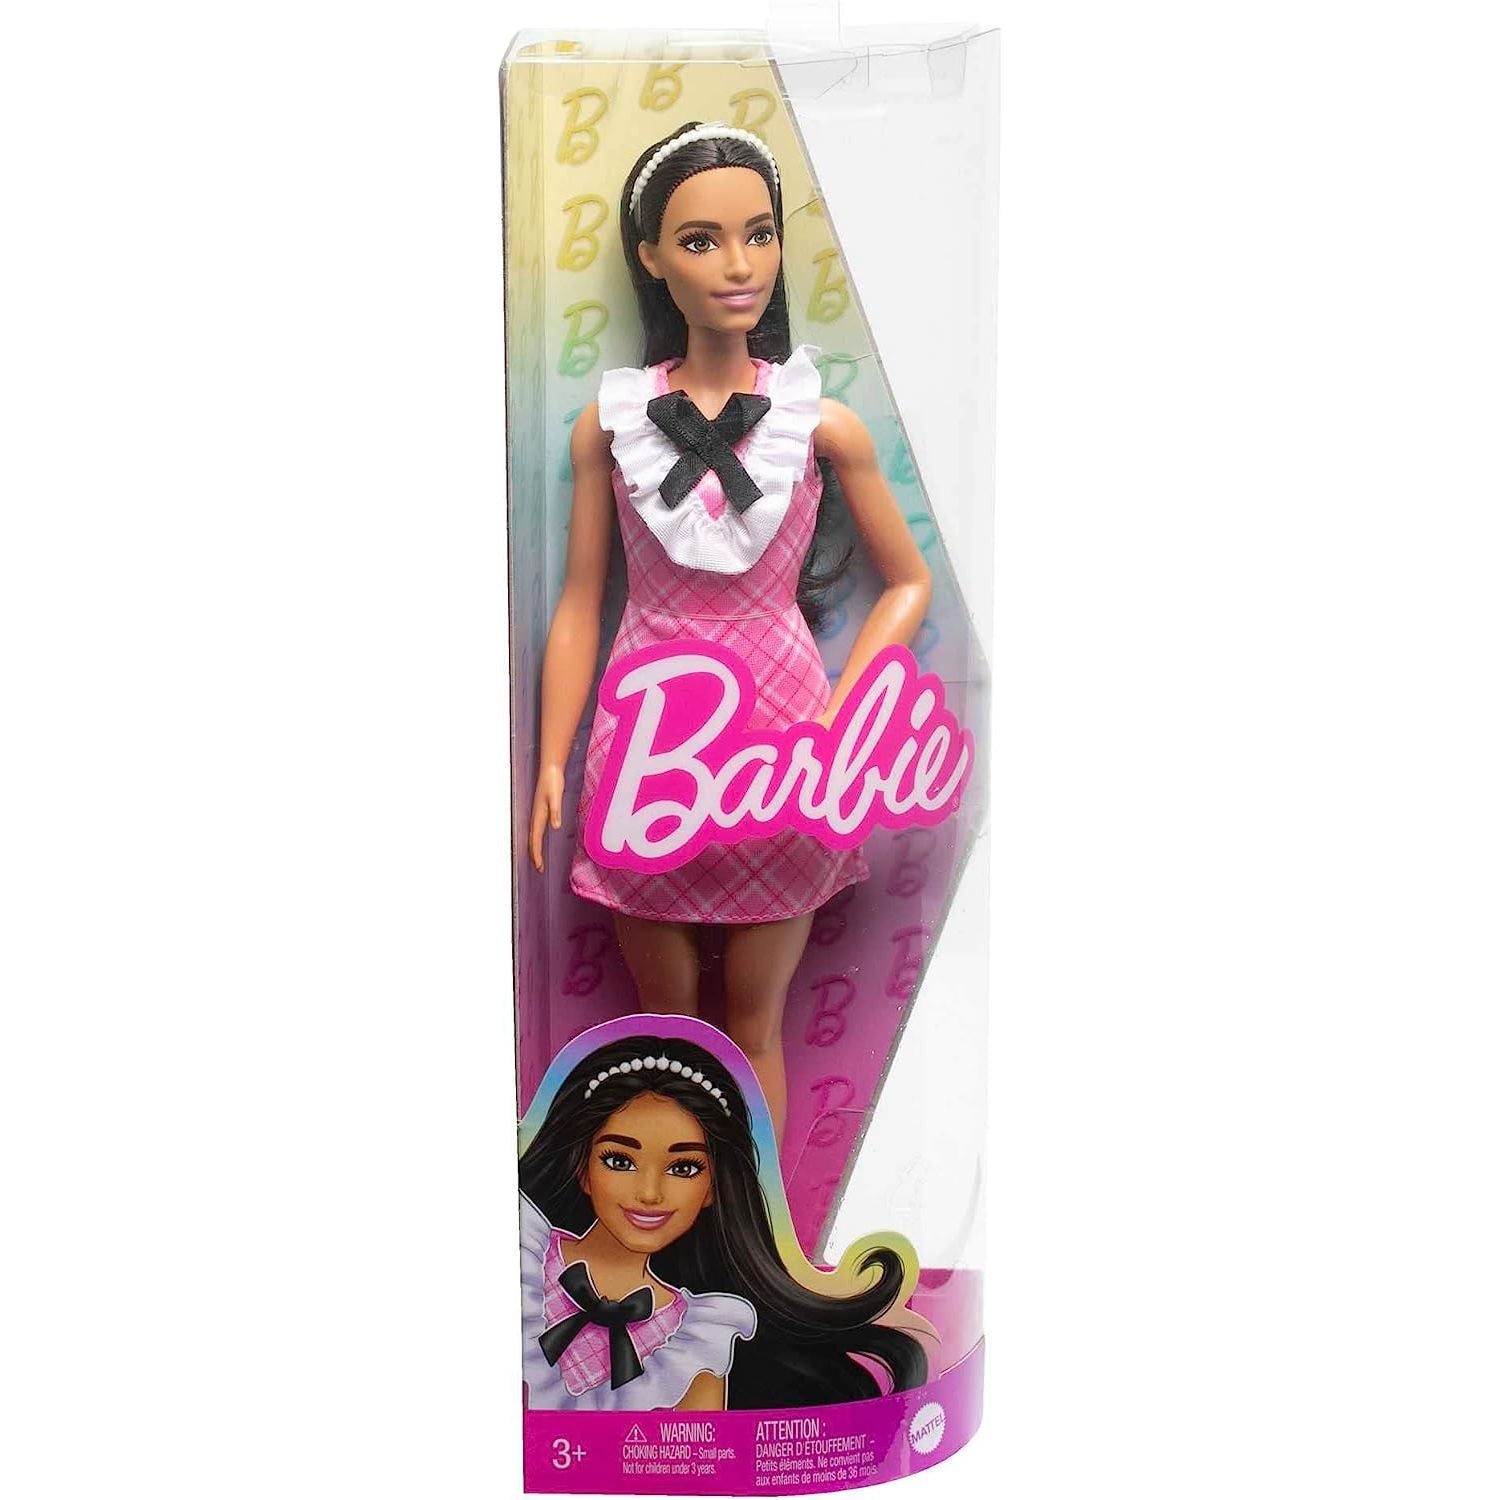 Mattel Barbie Fashionistas Doll #209 with Black Hair Wearing a Pink Plaid Dress, Pearlescent Headband and Strappy Heels